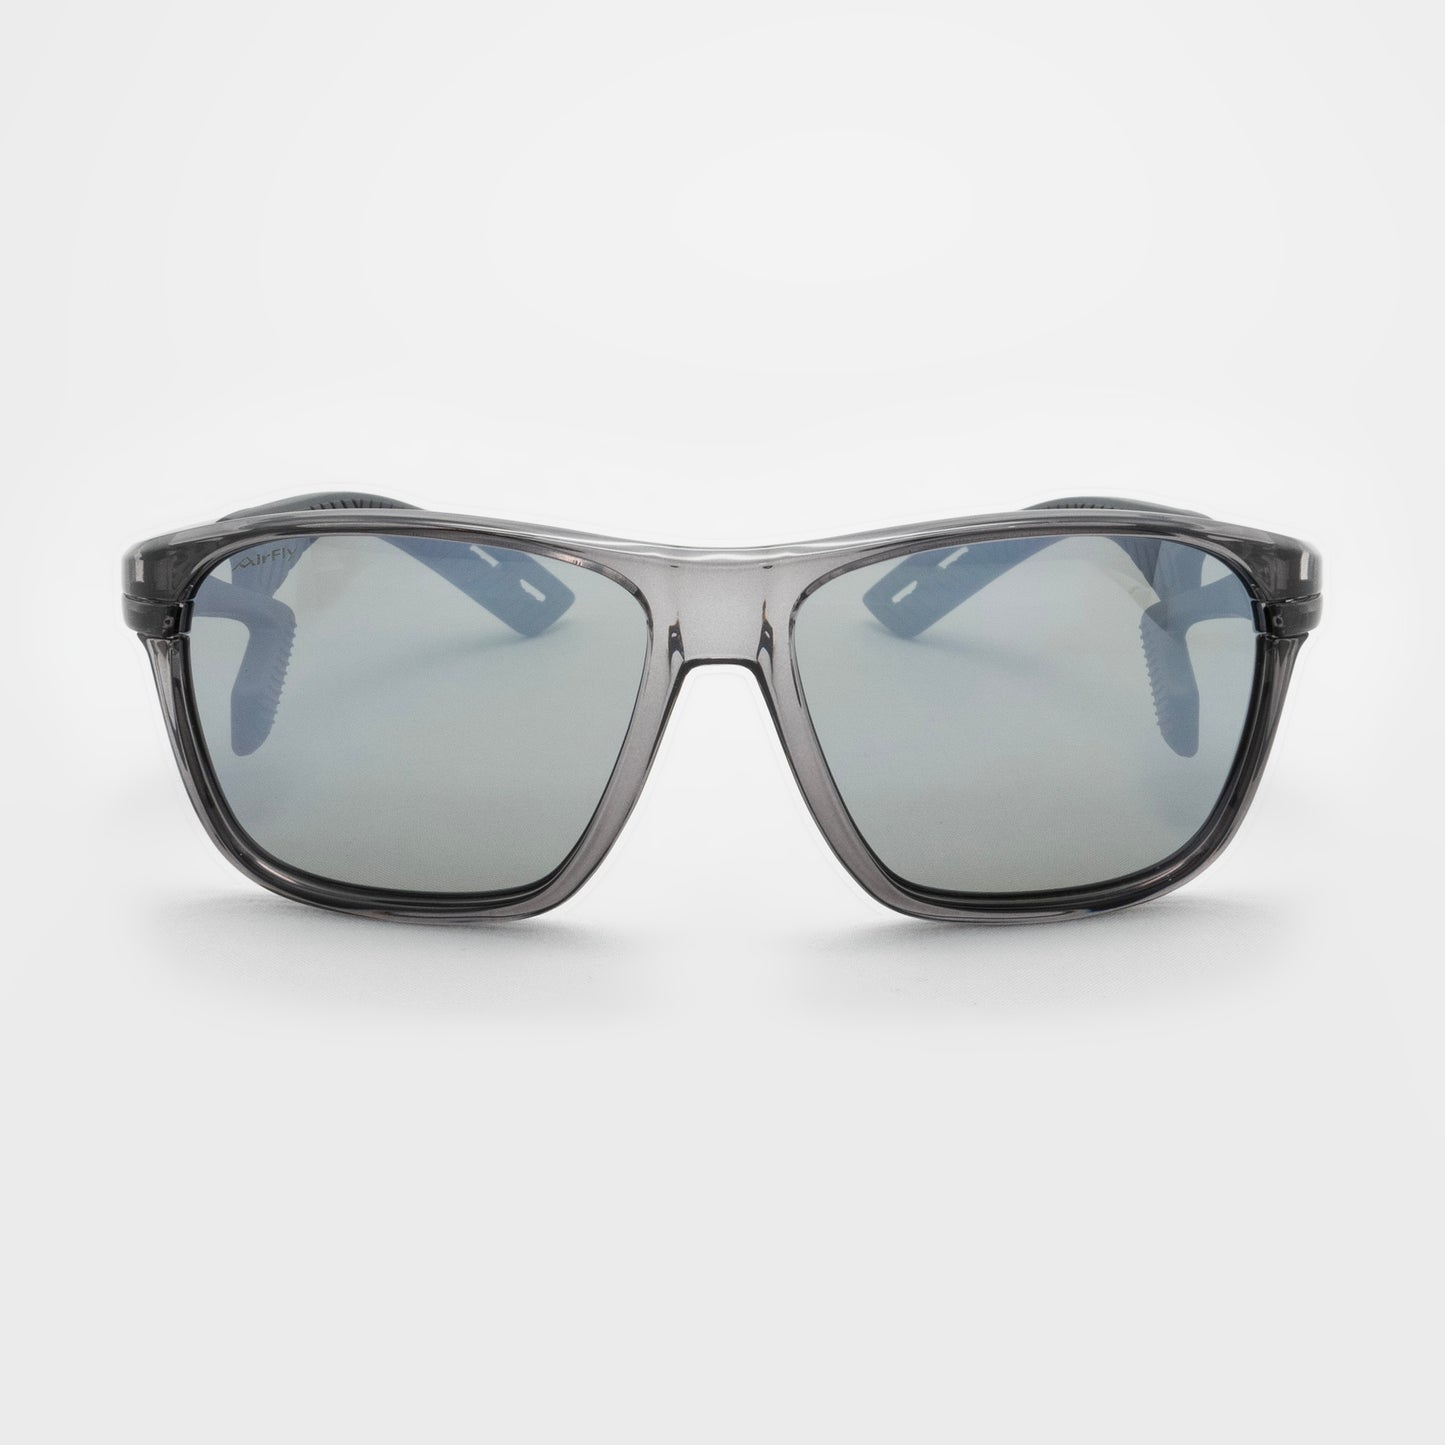 AirFly AF-402 C-2 Clear Ash / Light Gray